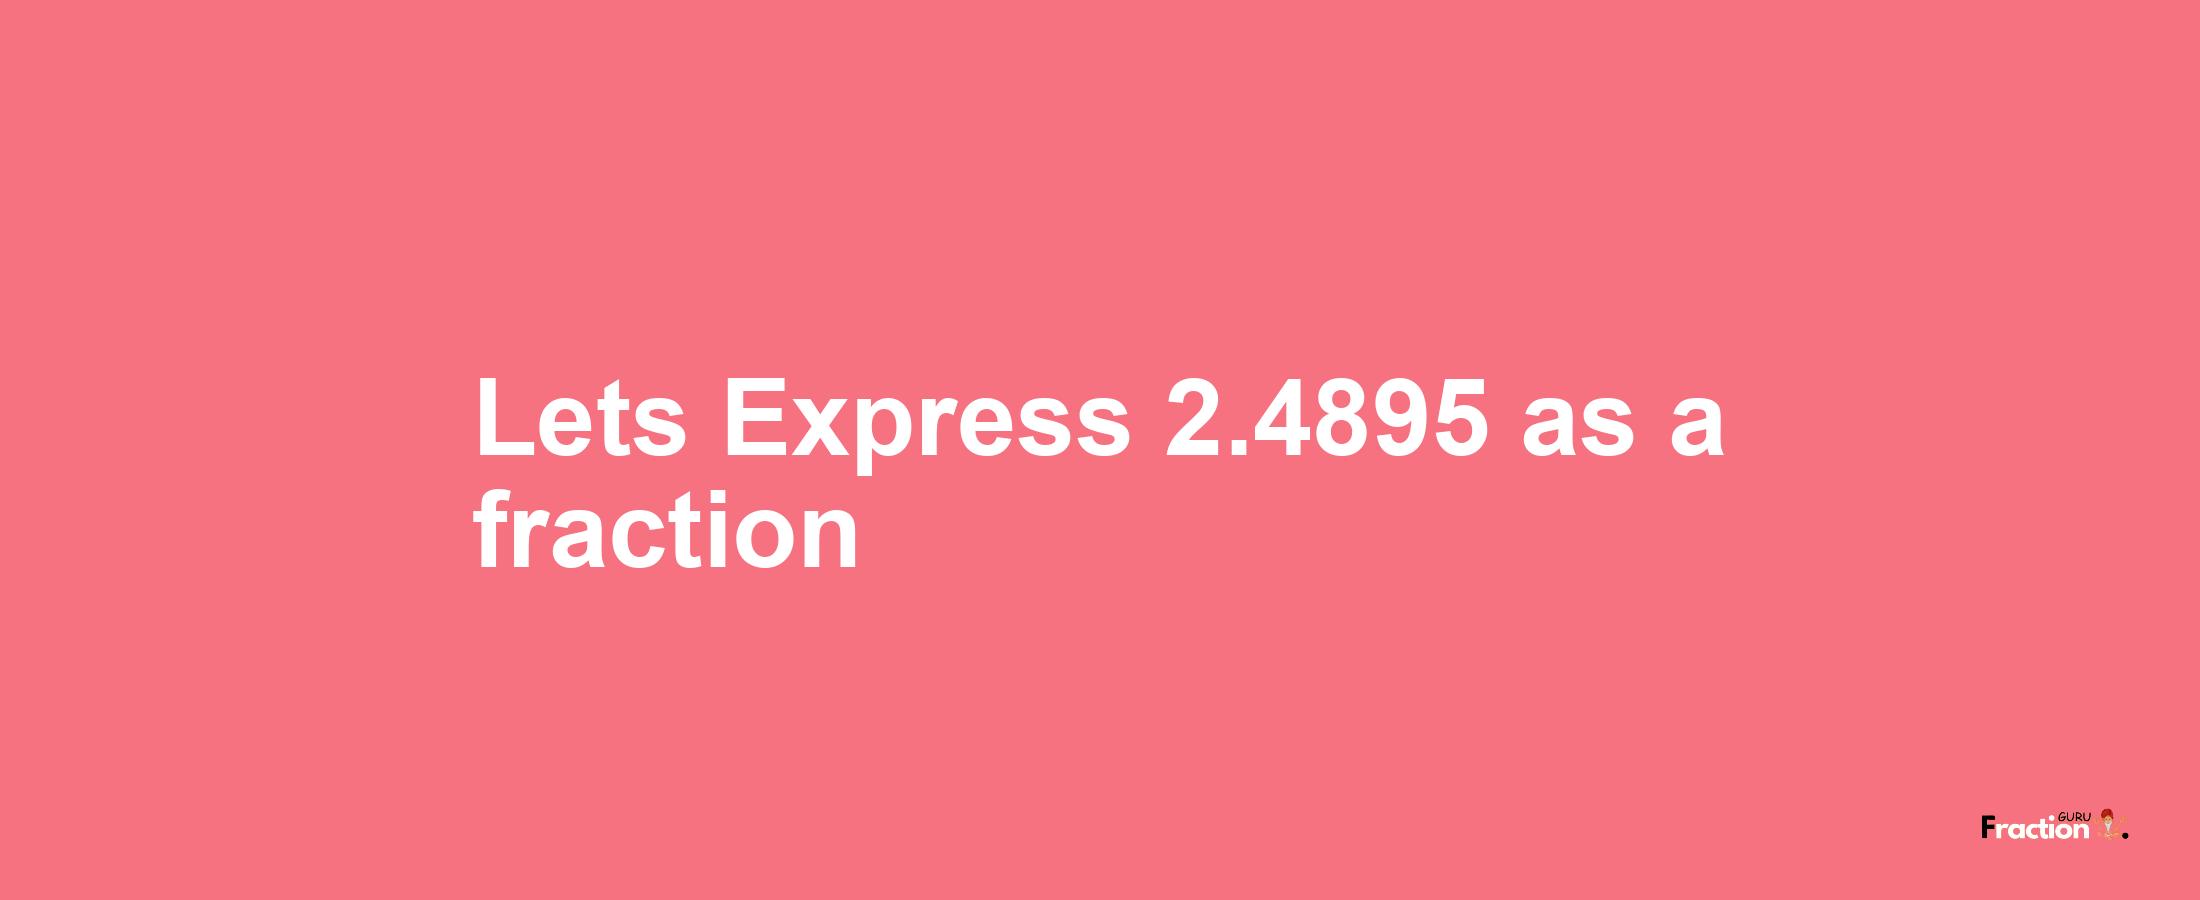 Lets Express 2.4895 as afraction